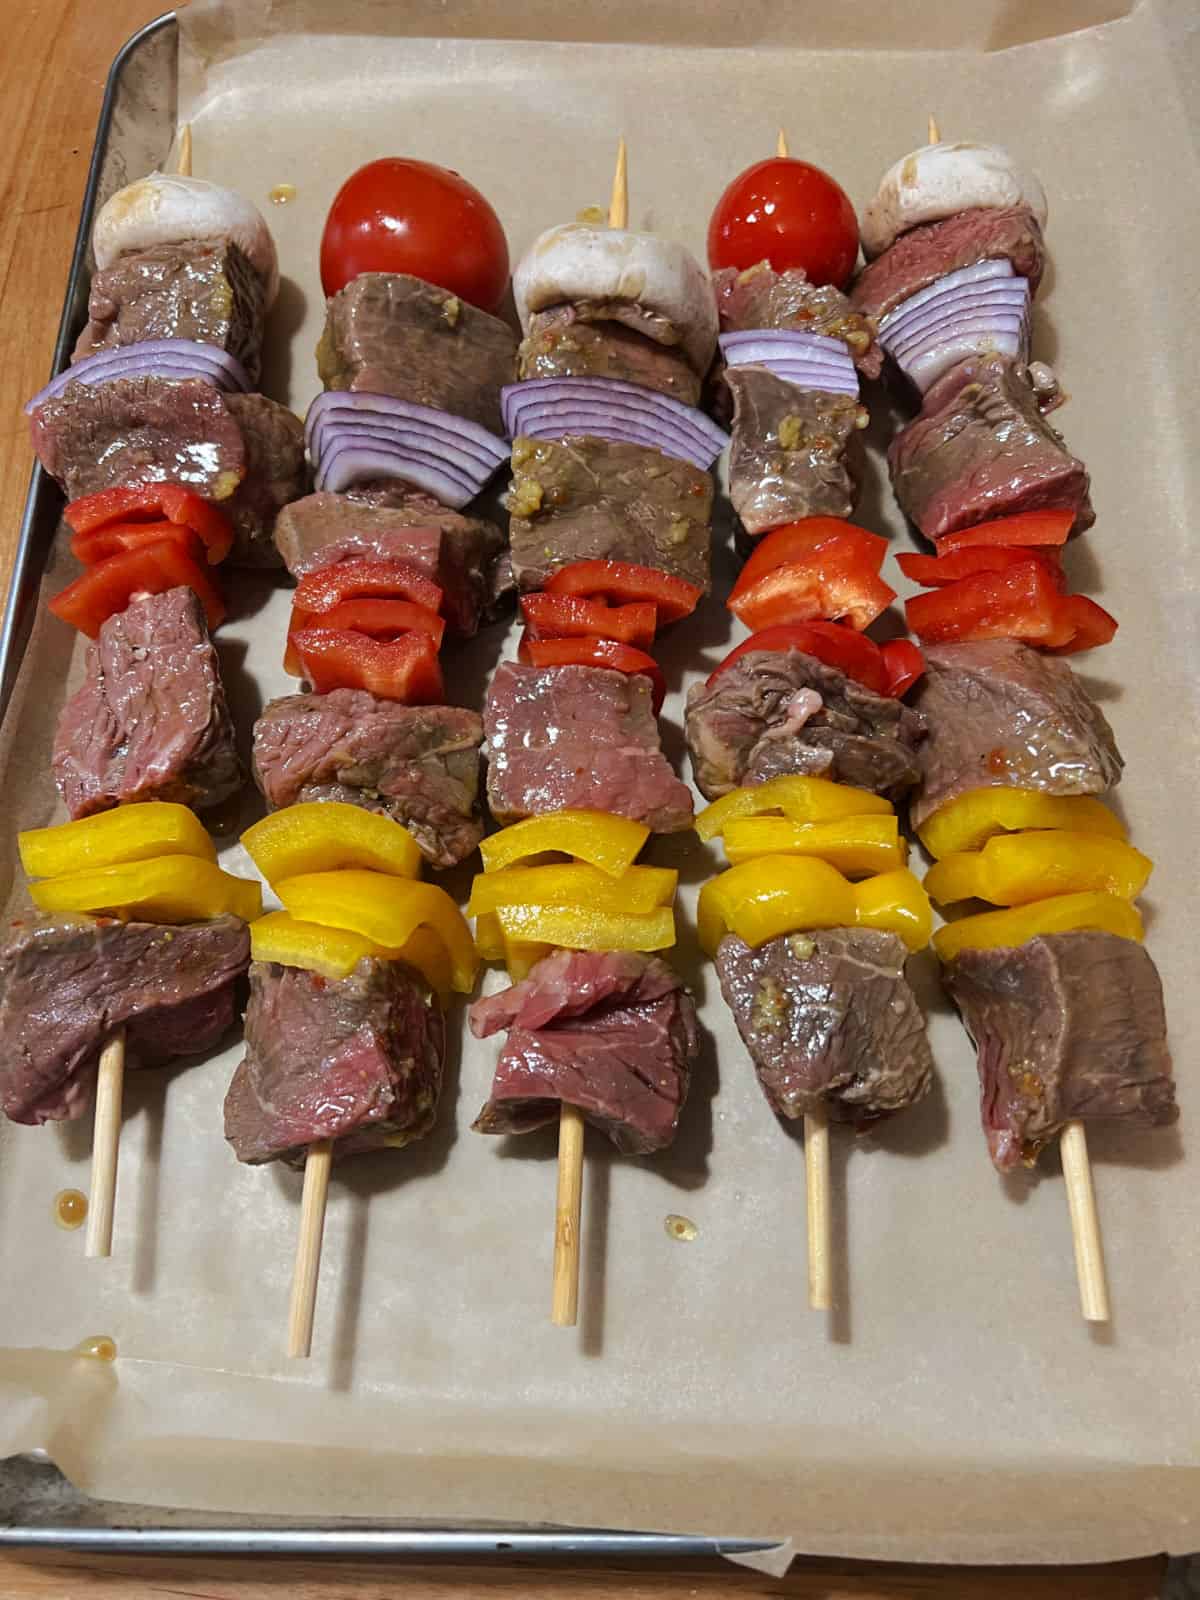 5 skewers loaded with beef and veggies.